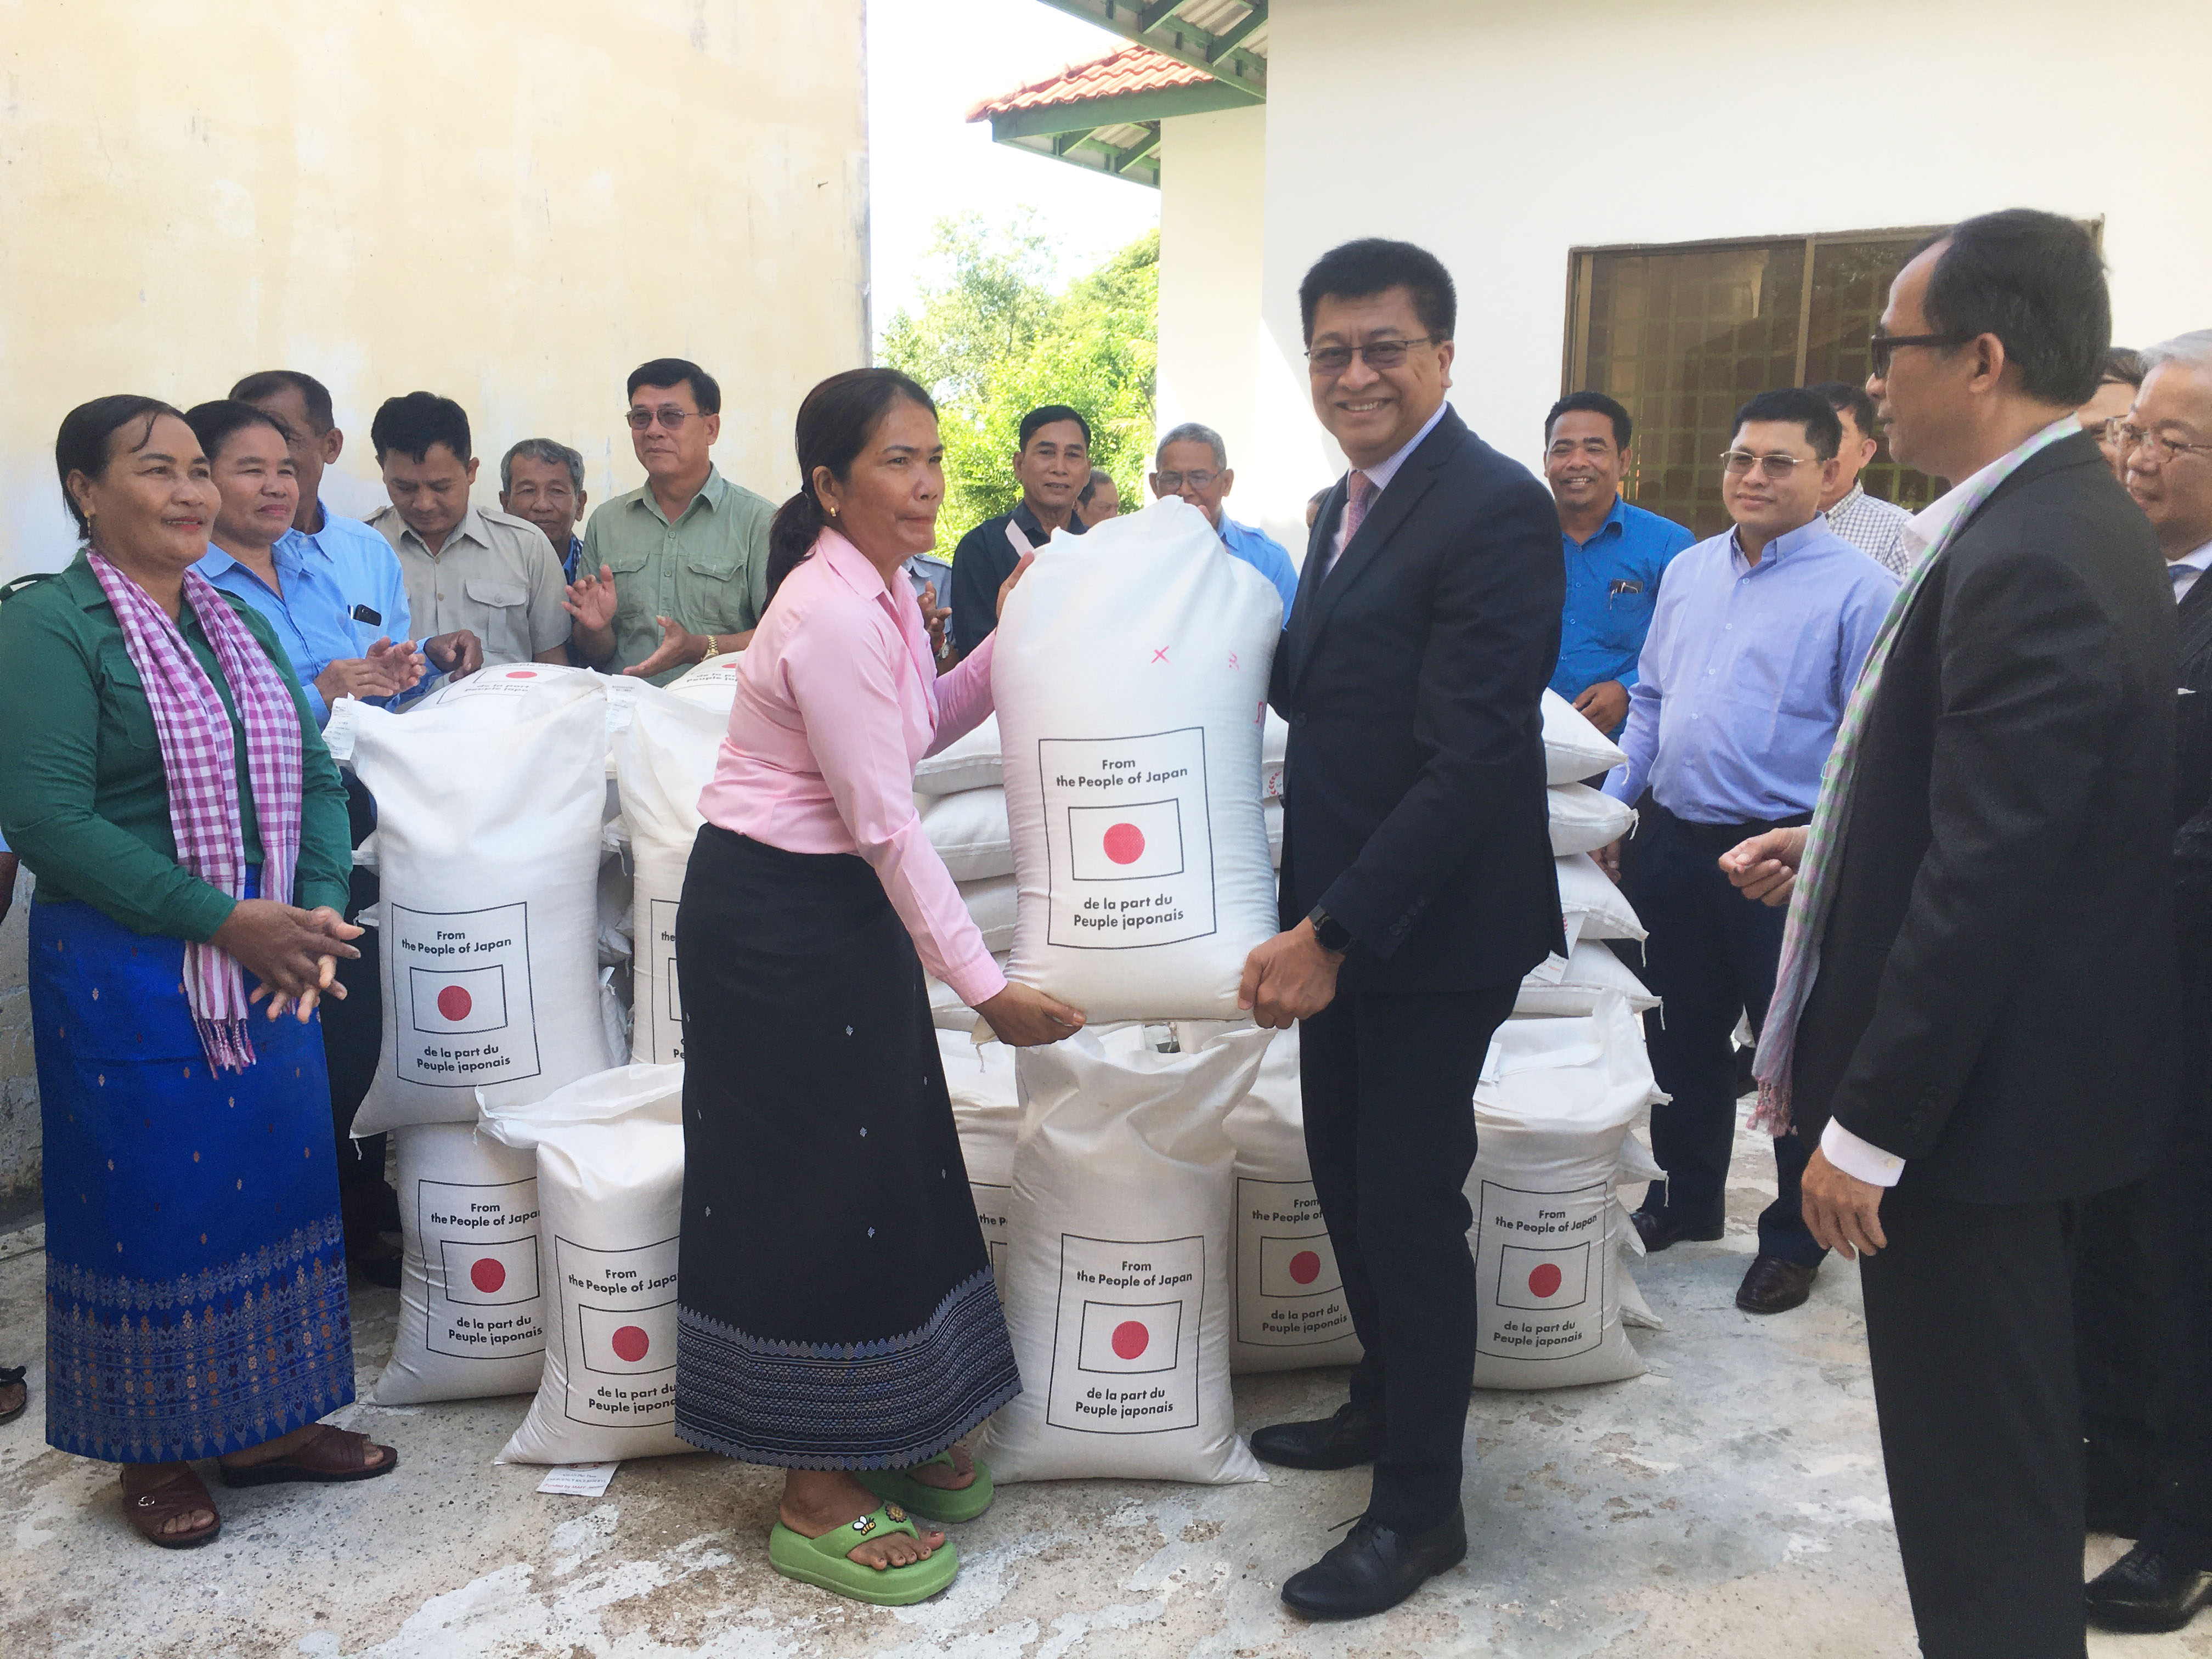 The APTERR rice donated by Japan reached over 40,000 people in Cambodia 